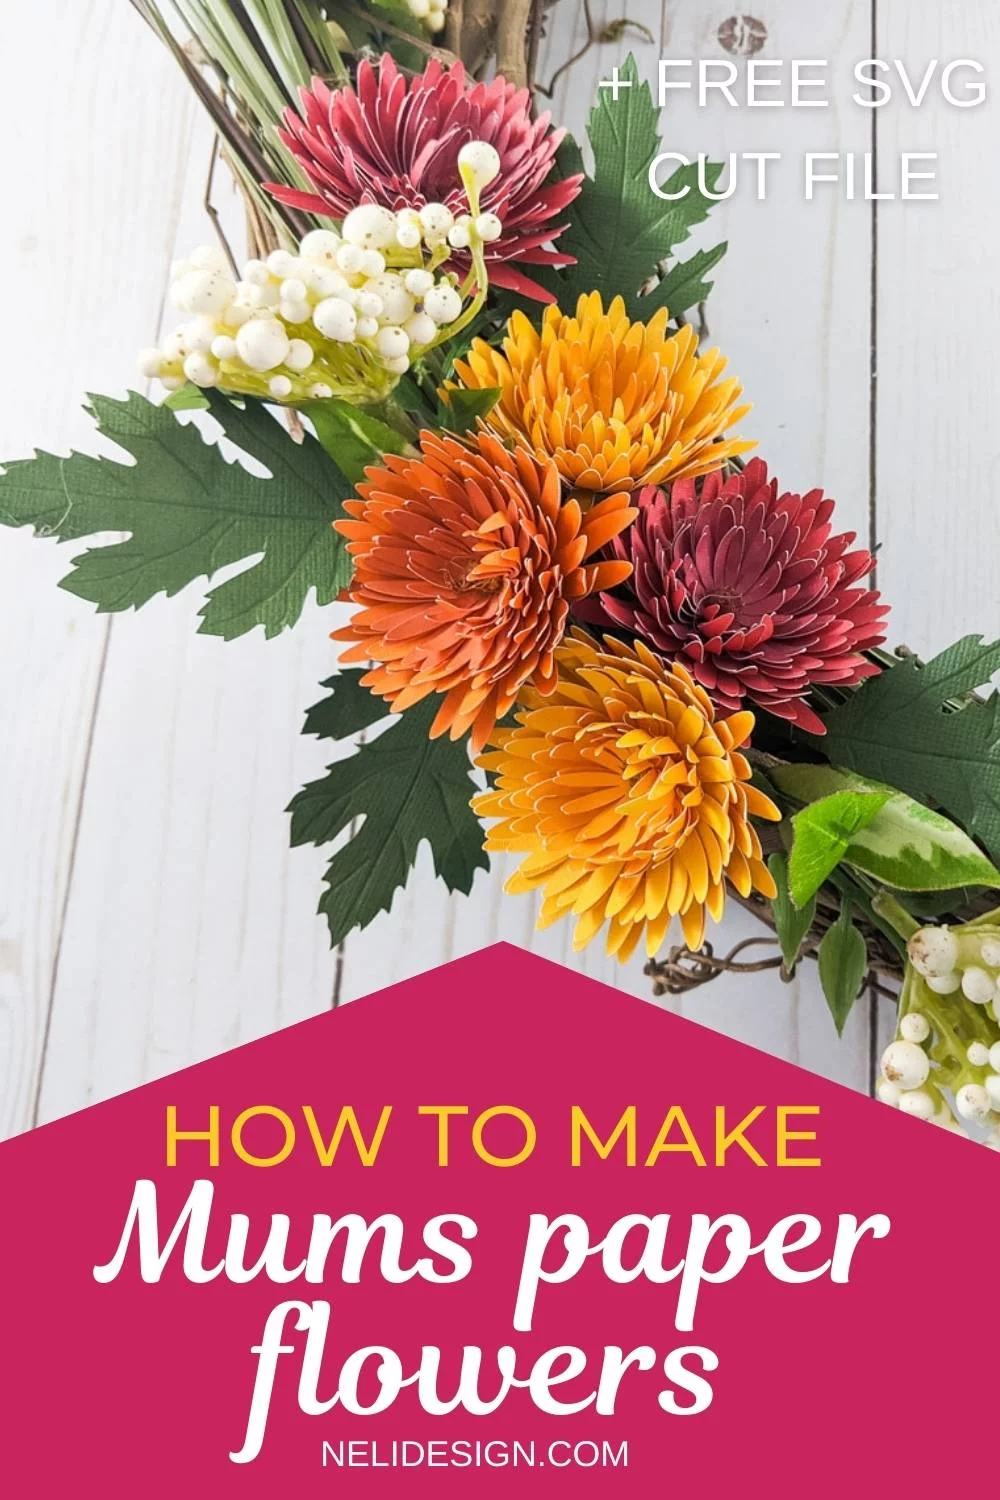 Pinterest image written How to make Mums paper flowers + free SVG cut file